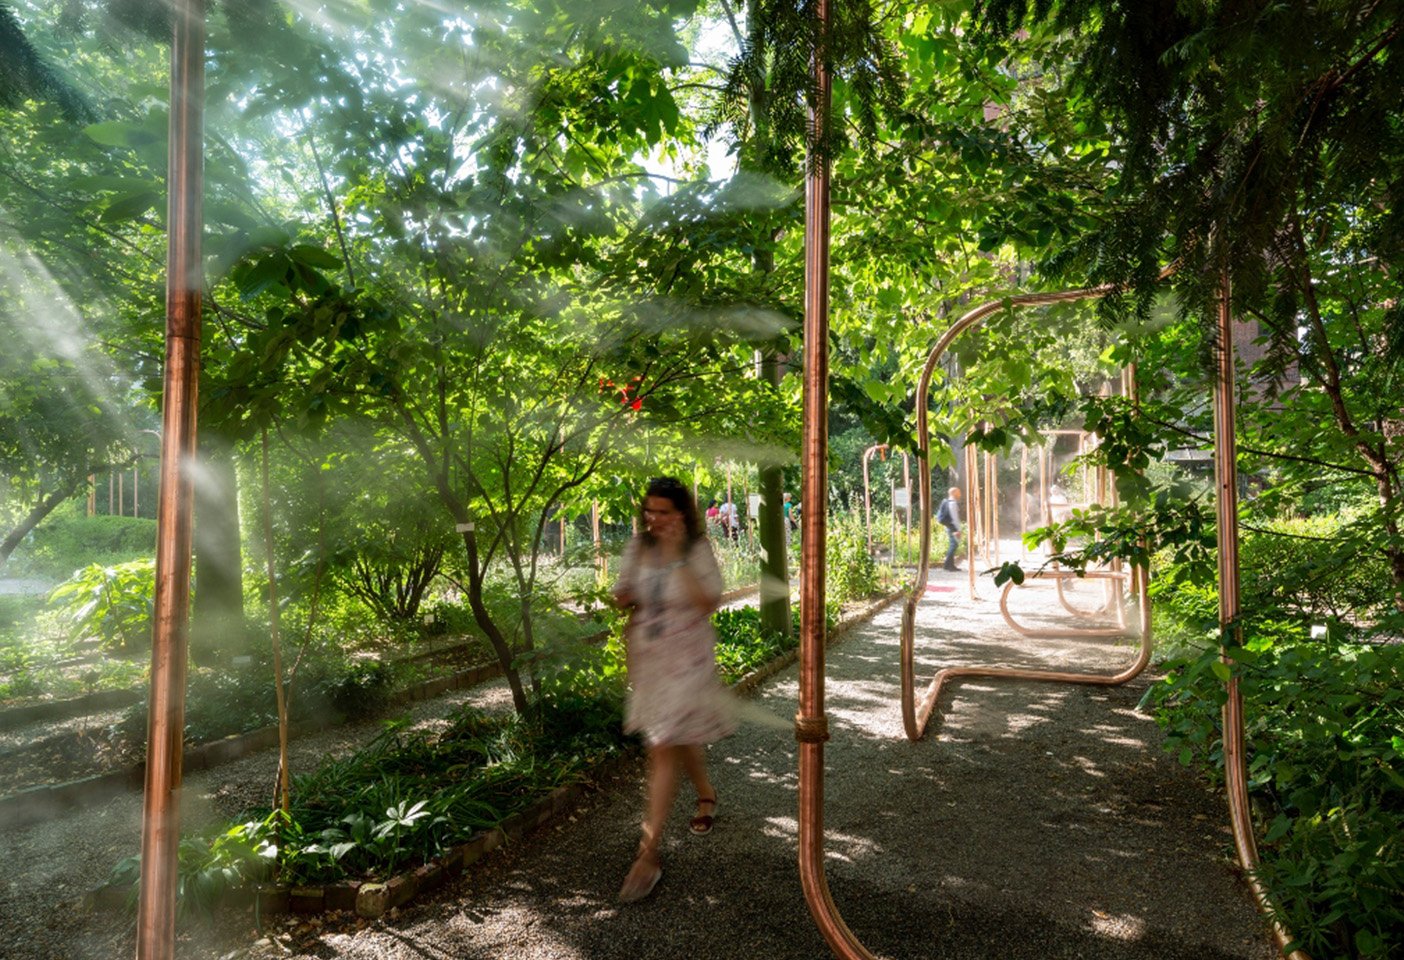 Italian architect Carlo Ratti continued his investigation into design’s role in solving the environmental crisis by showing different forms of sustainable energy with the exhibition ‘Feeling the Energy’ at the Brera botanical gardens. Photos c/o Carlo Ratti. 